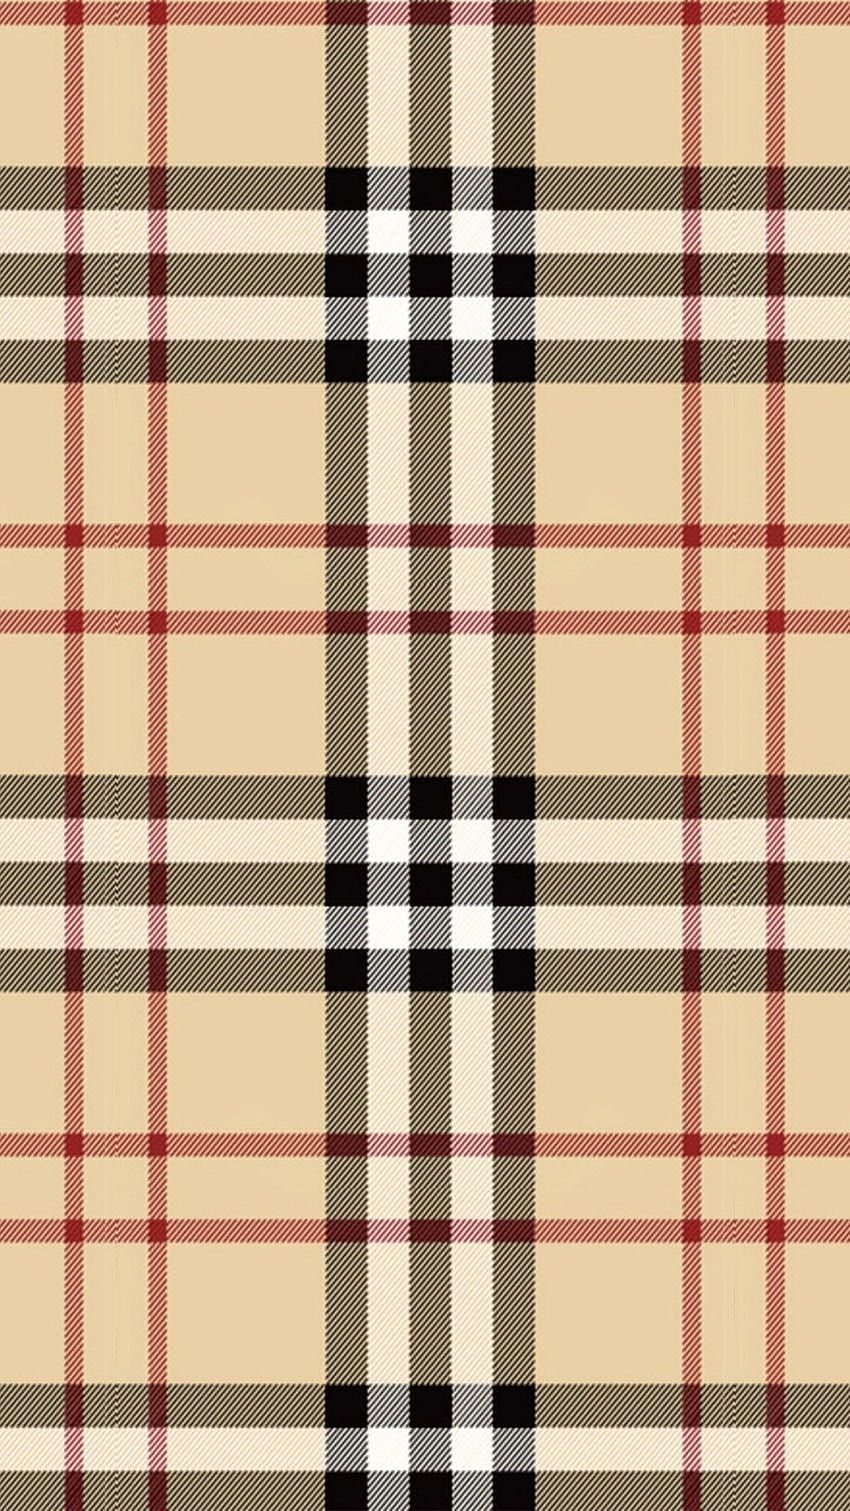 A close up of the burberry checkered pattern - Checkered